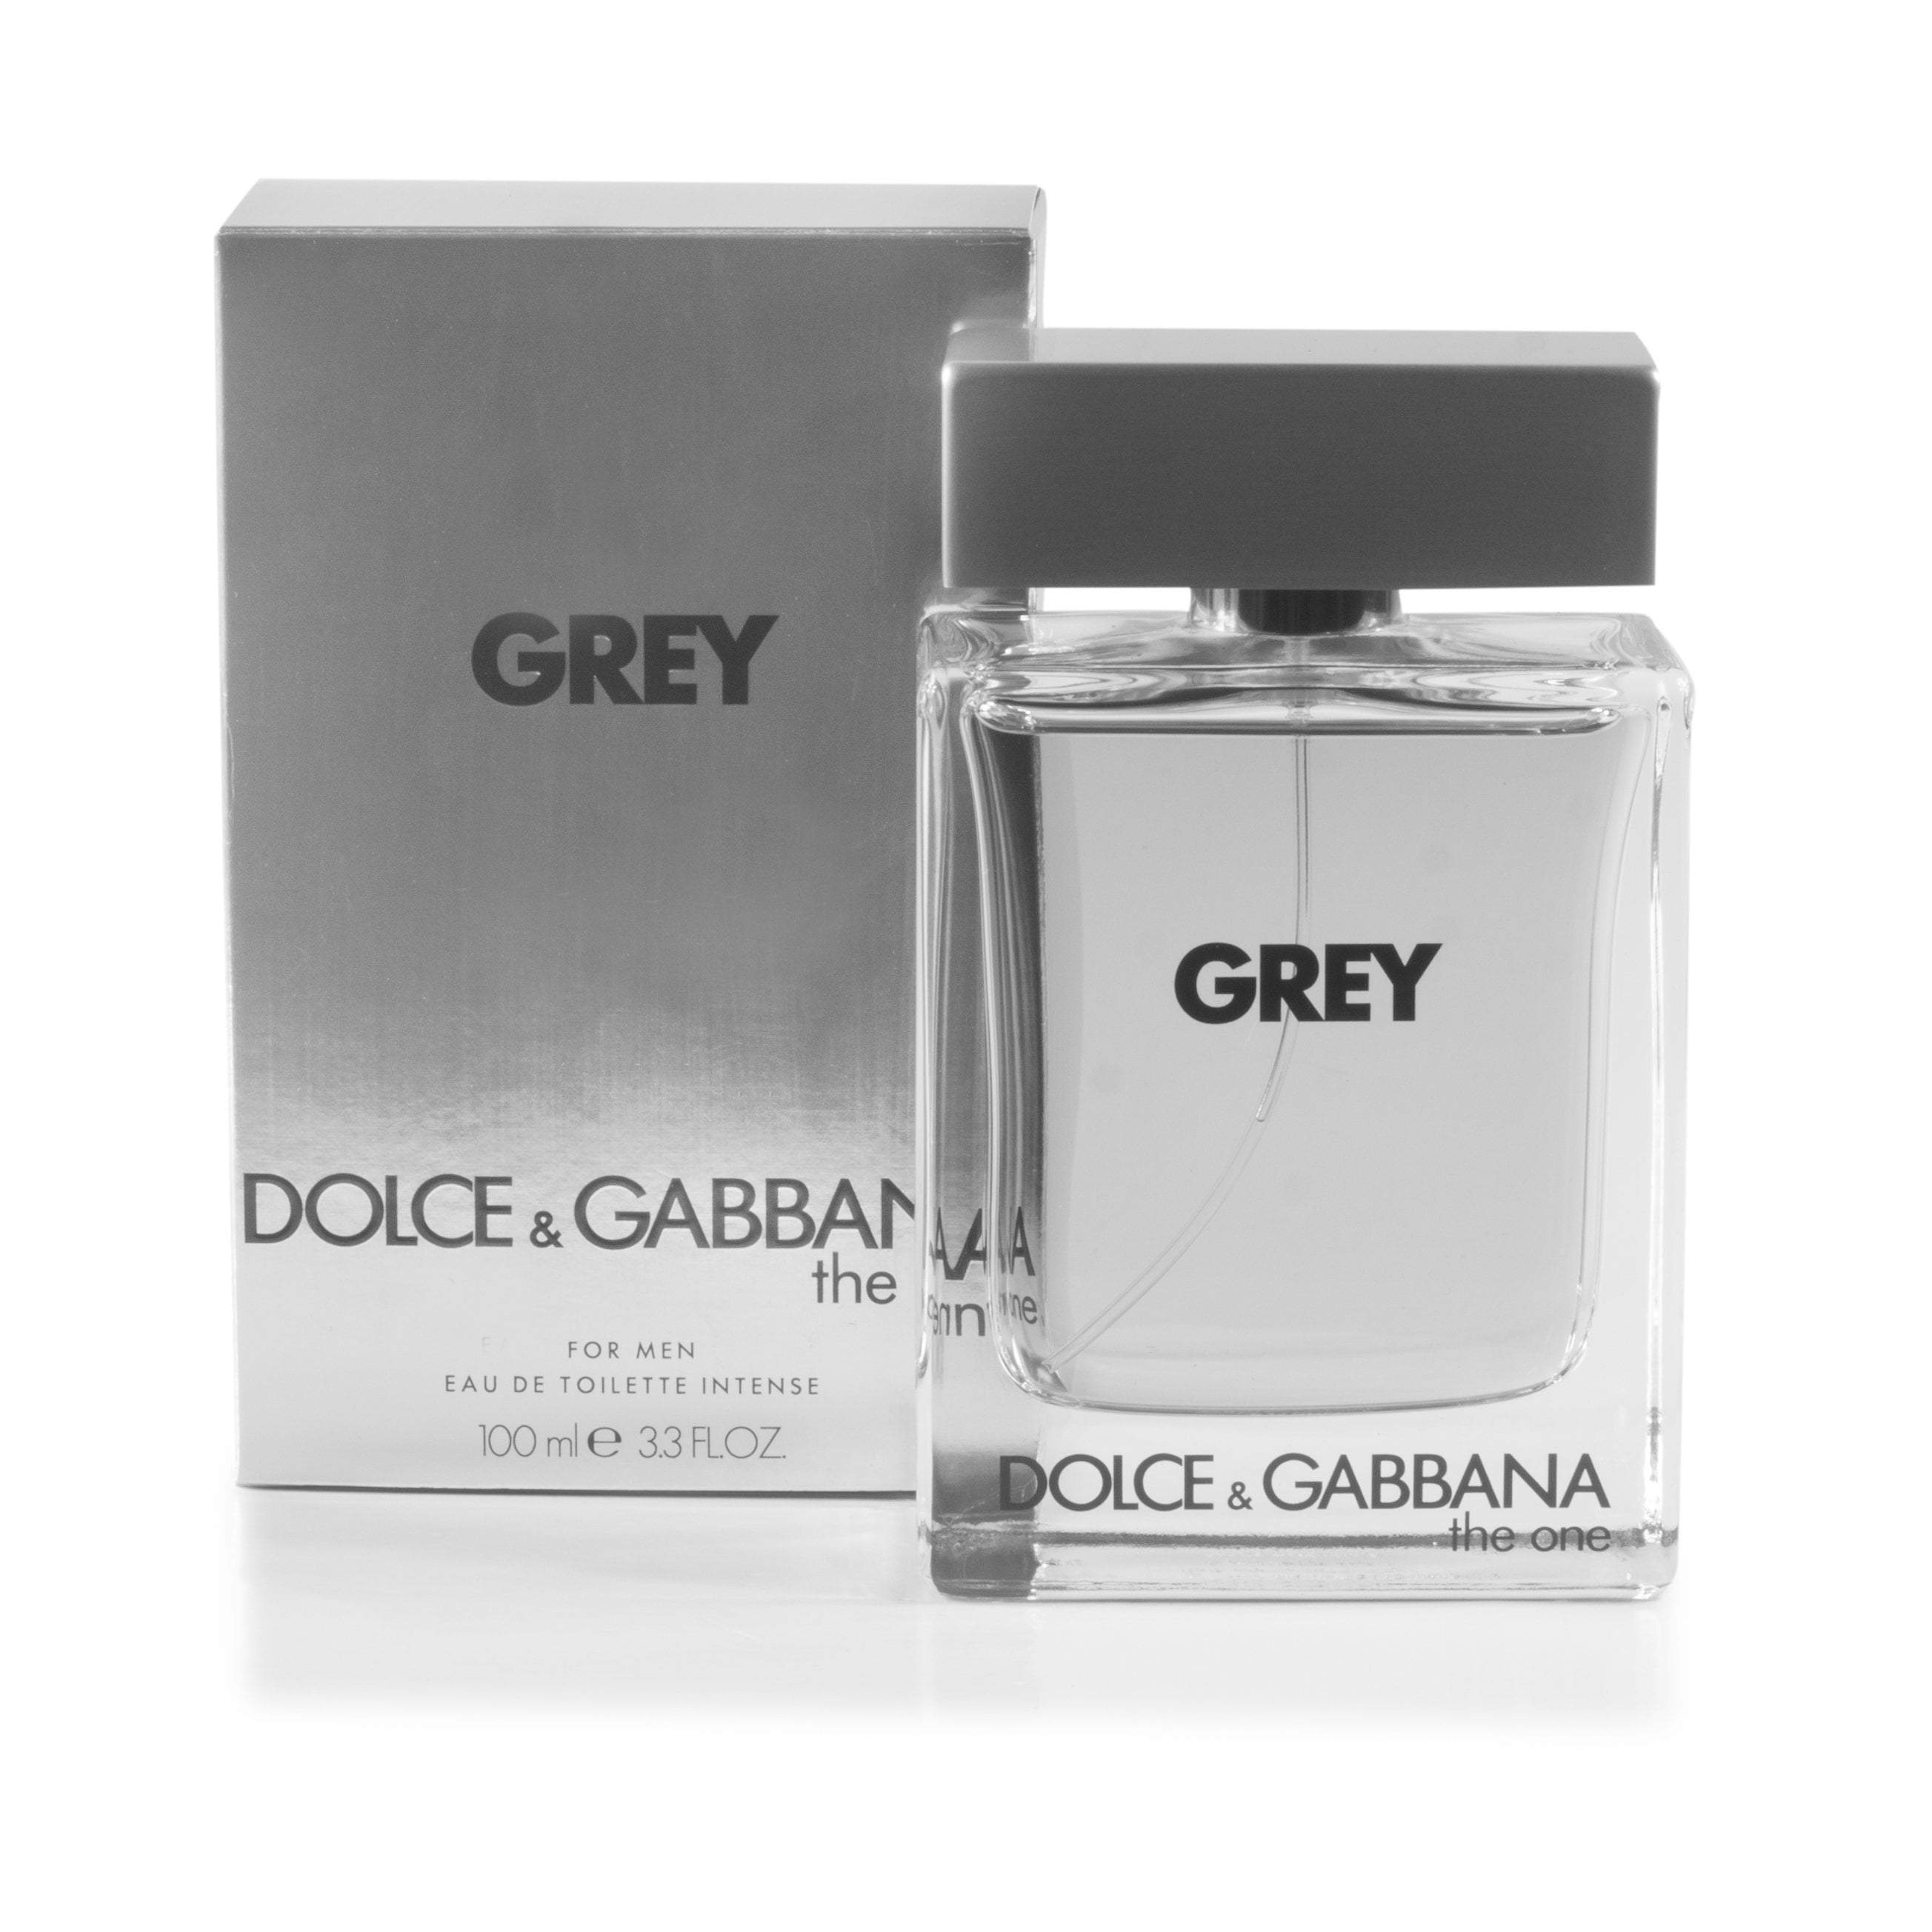 dolce and gabbana grey cologne review